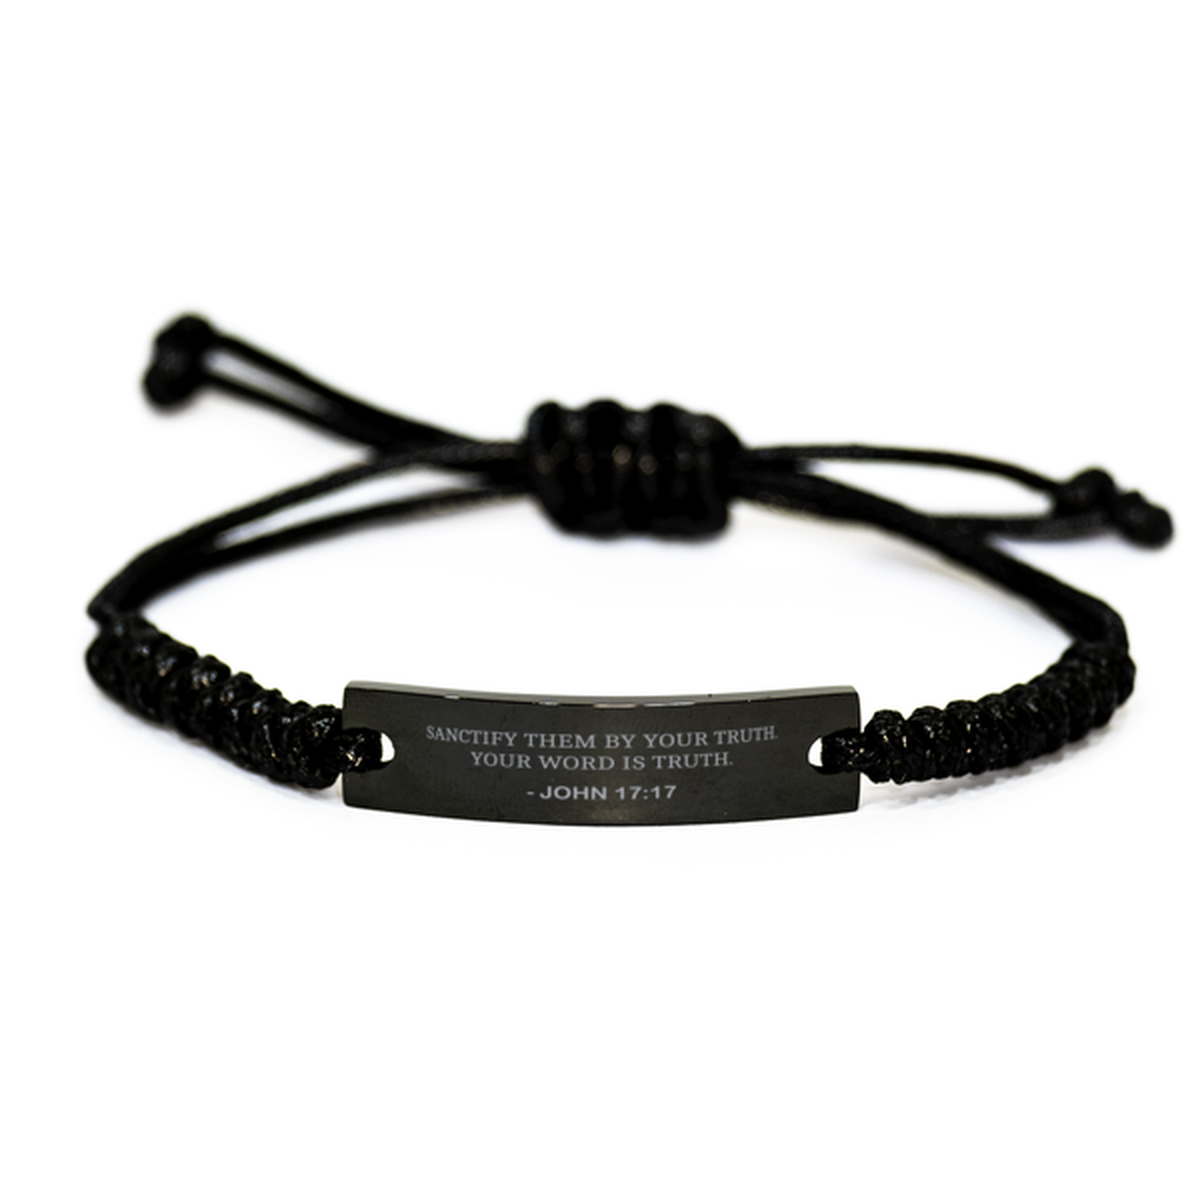 Bible Verse Rope Bracelet, John 17:17 Sanctify Them By Your Truth. Your Word Is, Christian Encouraging Gifts For Men Women Boys Girls